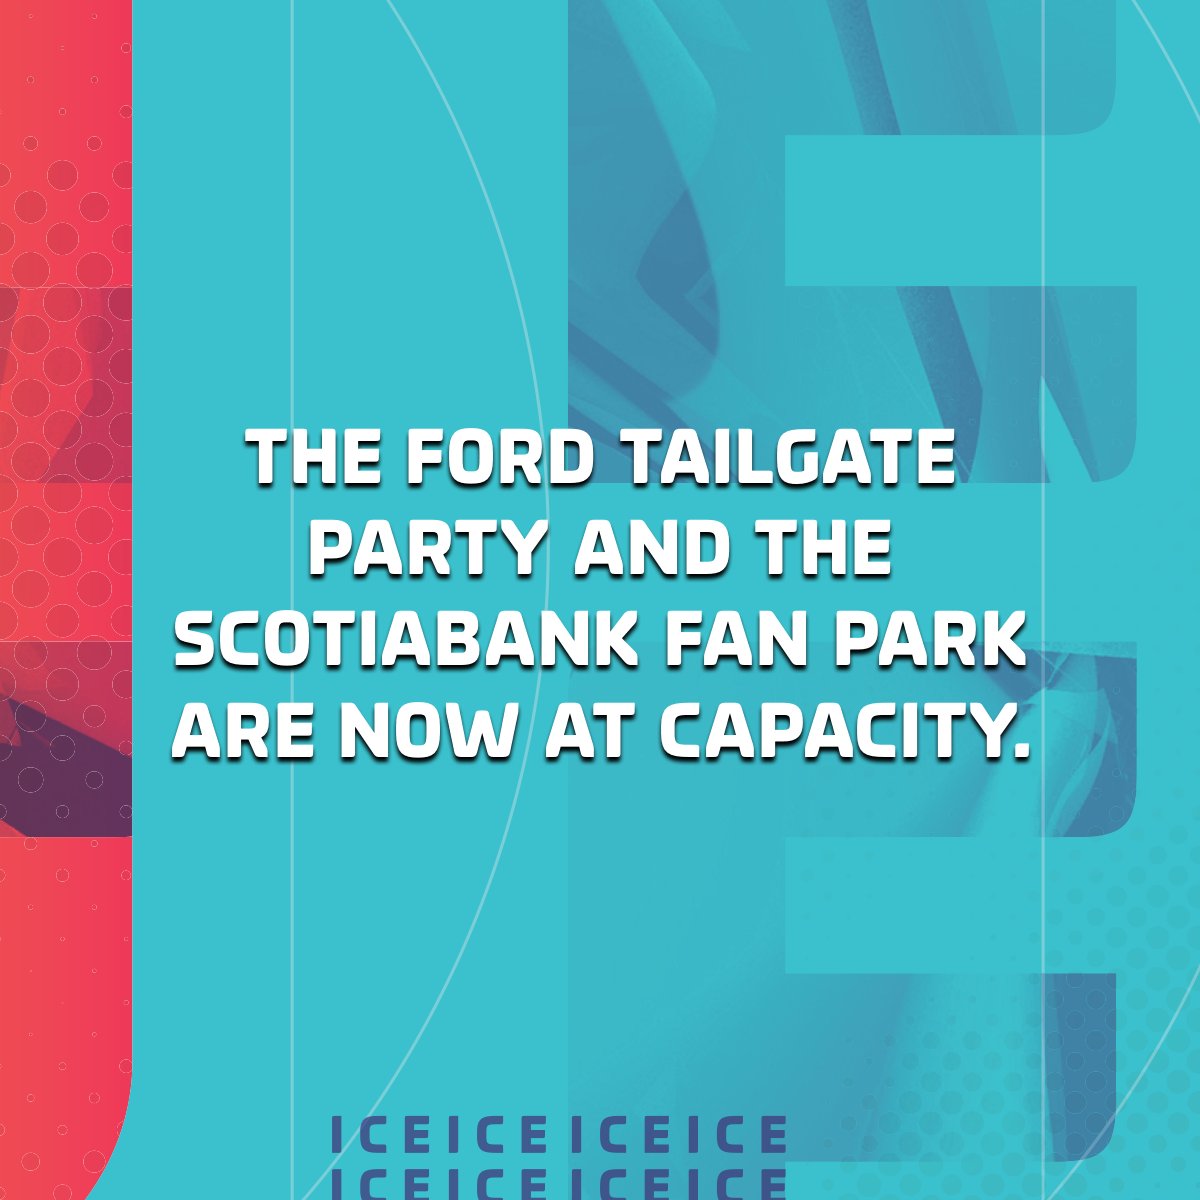 🚨 HEADS UP!! 🚨⁠
⁠
The @FordCanada Tailgate Party, @Scotiabank Fan Park and the @Molson_Canadian Hockey House are now at capacity.⁠
⁠
Fans in the area are encouraged to watch the game at other locations downtown.